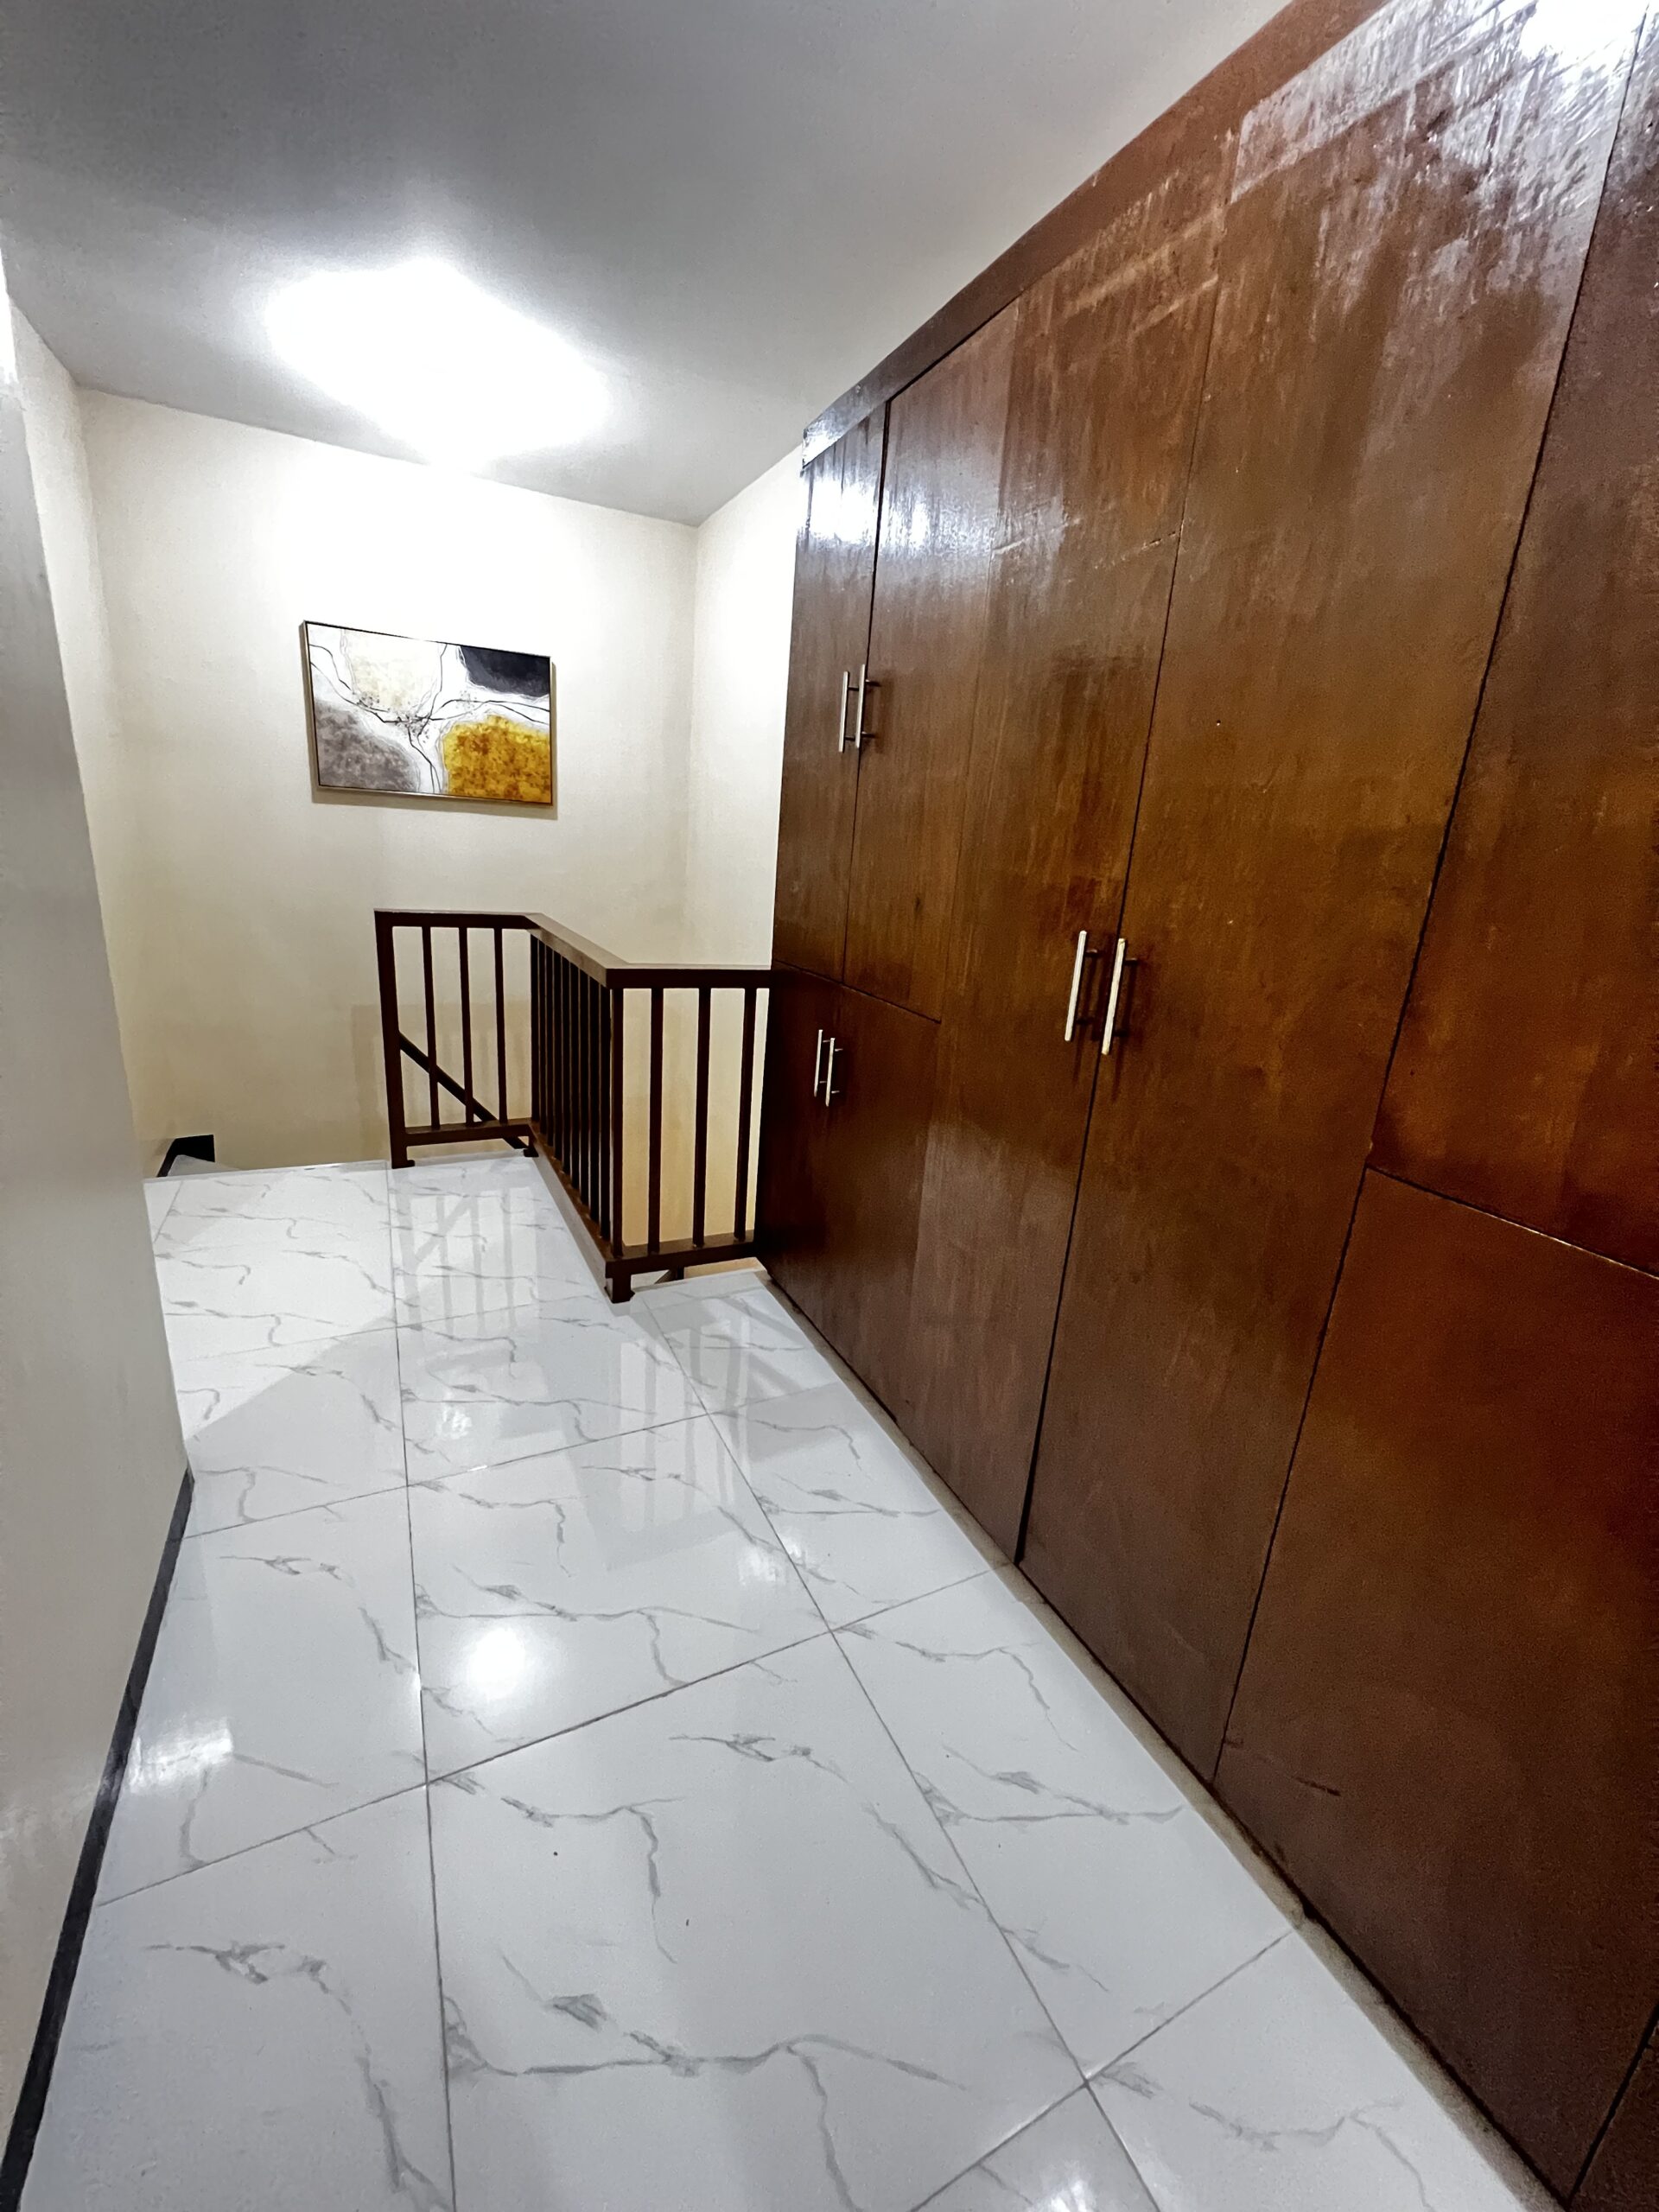 furnished house for sale in compostela, richwood homes compostela